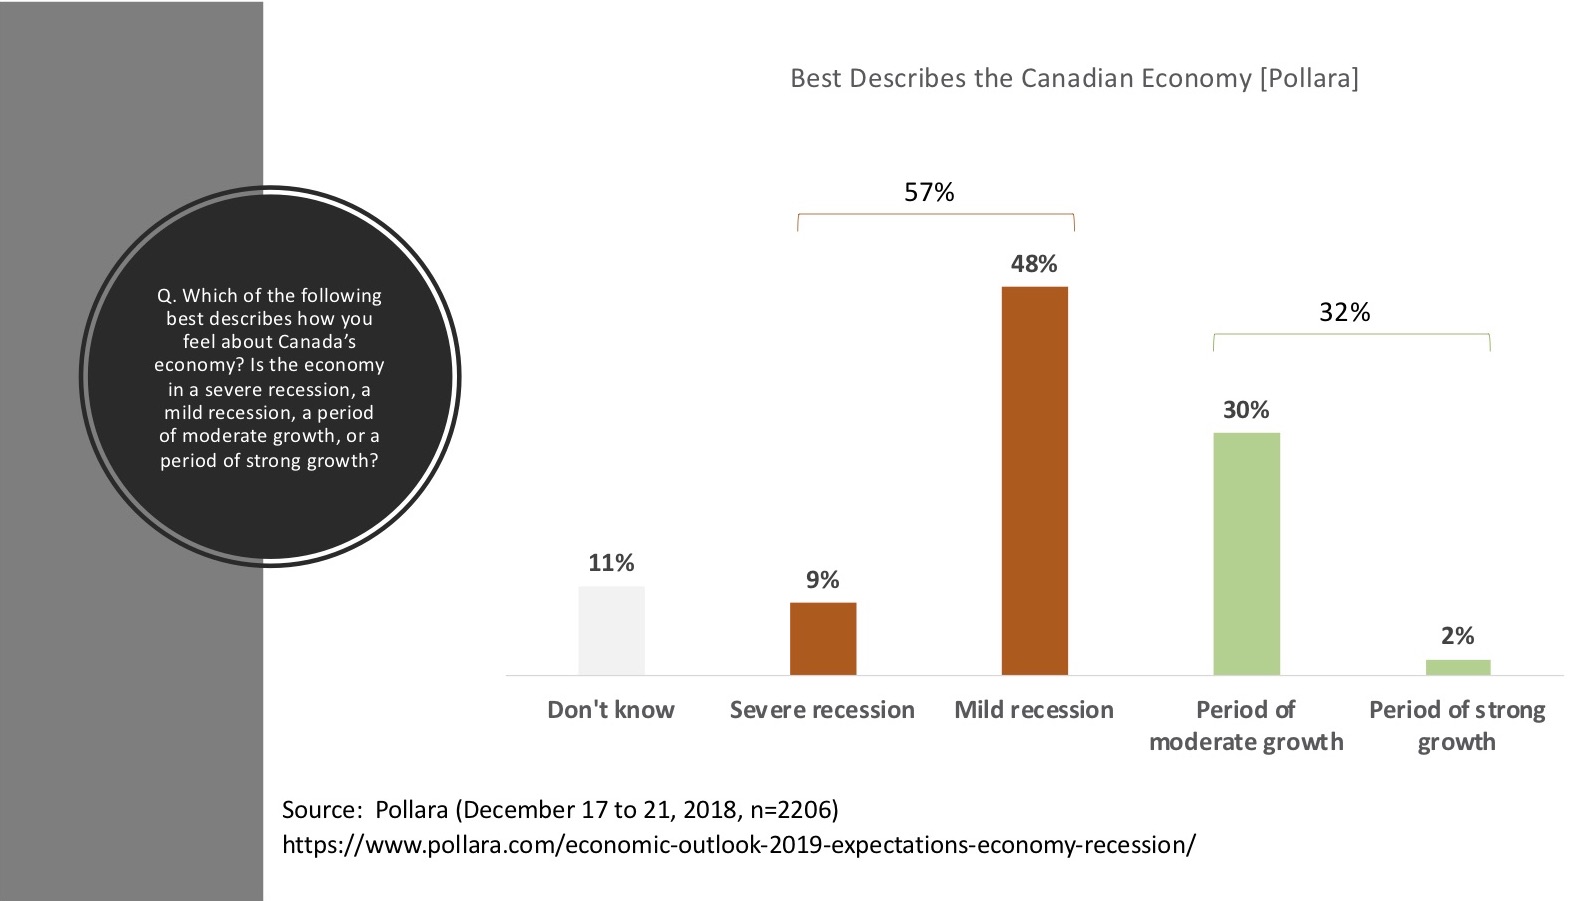 2019 recession -- 57% feel this way about the economy